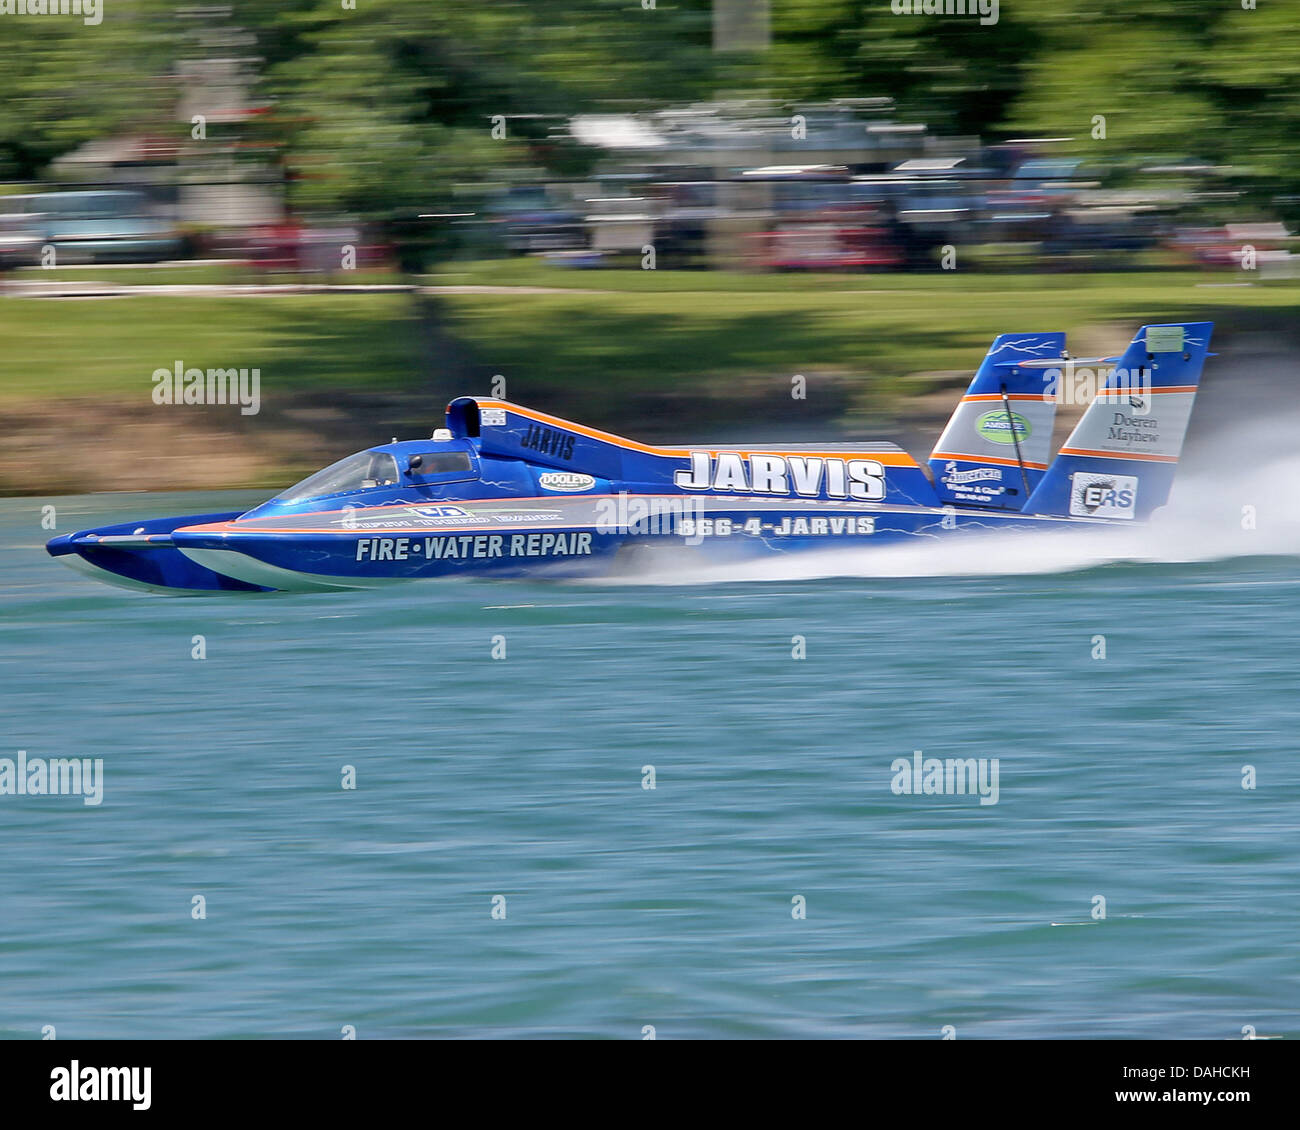 Detroit, MI, USA. 13th July, 2013. Ryan Mallow (100) pilots his Jarvis Property Restoration boat past the Detroit shoreline during heat 1b on the Detroit River on July 13, 2013 in Detroit, Michigan. Tom Turrill/CSM/Alamy Live News Stock Photo